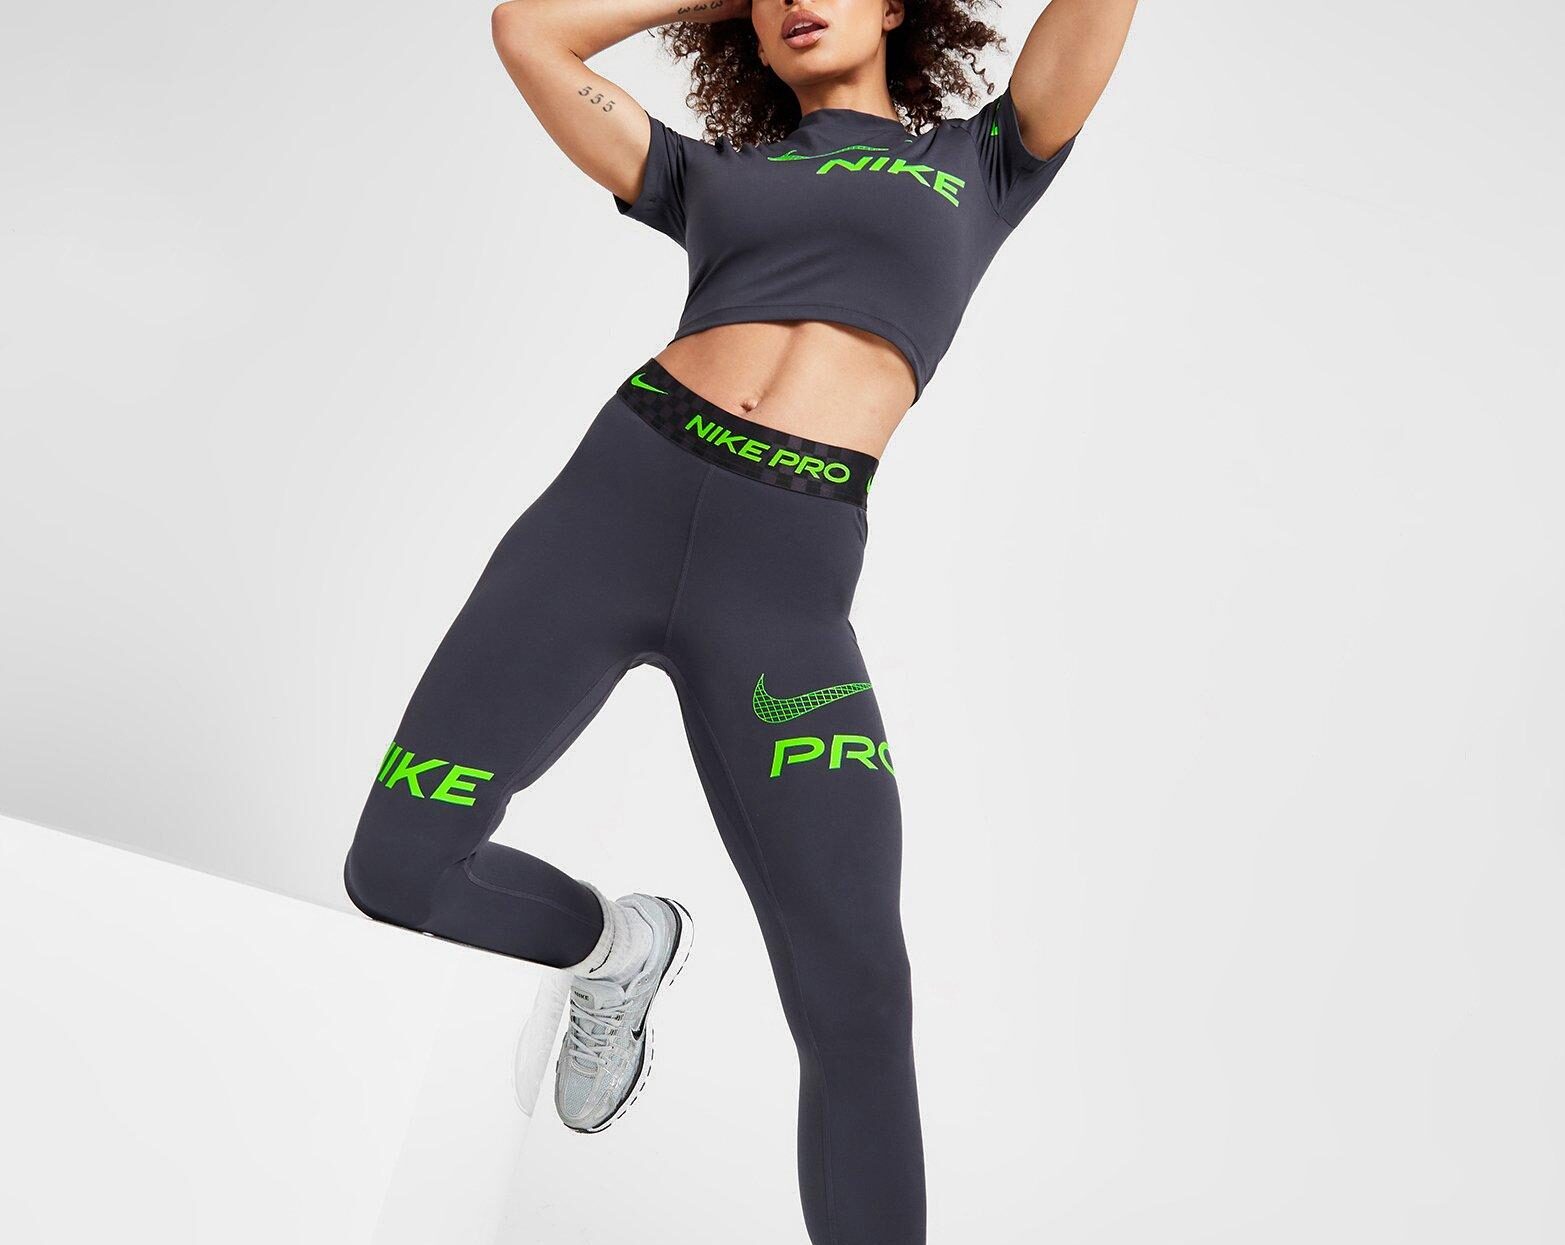 Stay Cool during High-Intensity Workouts with Nike Pro Women’s Leggings (w/ wide elastic waistband provides extra support)